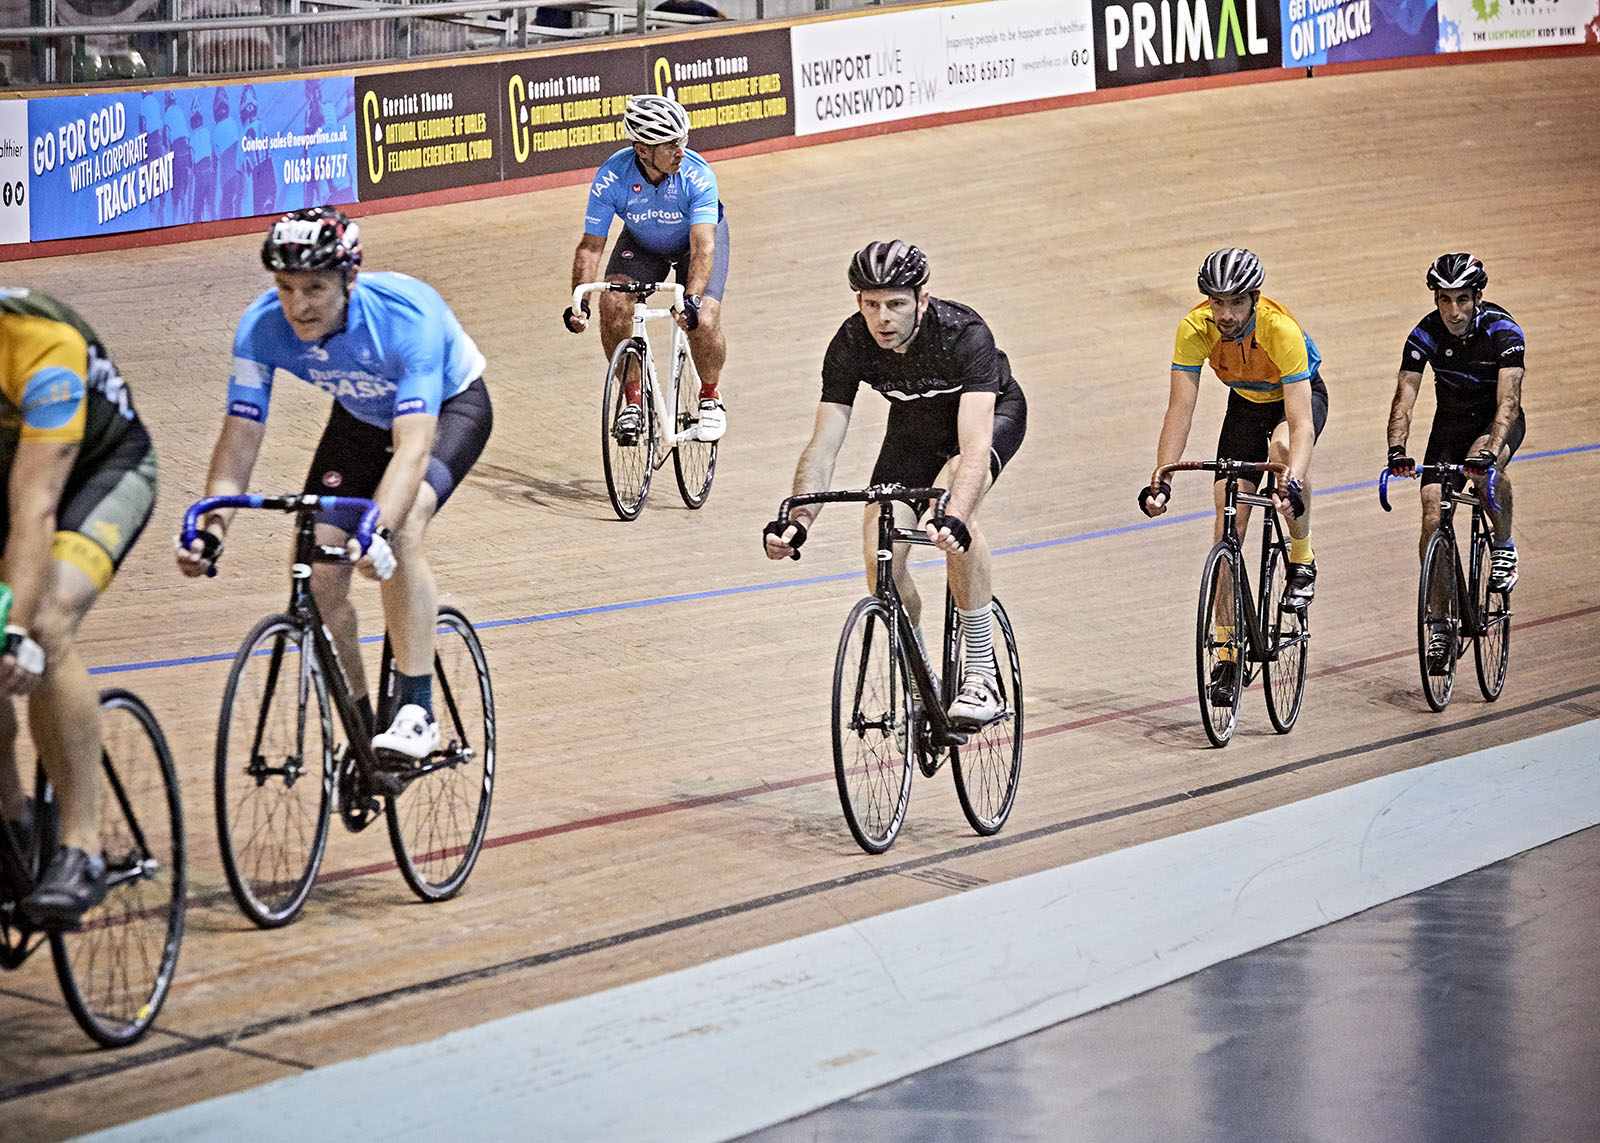 group of adult riders on a cycling track